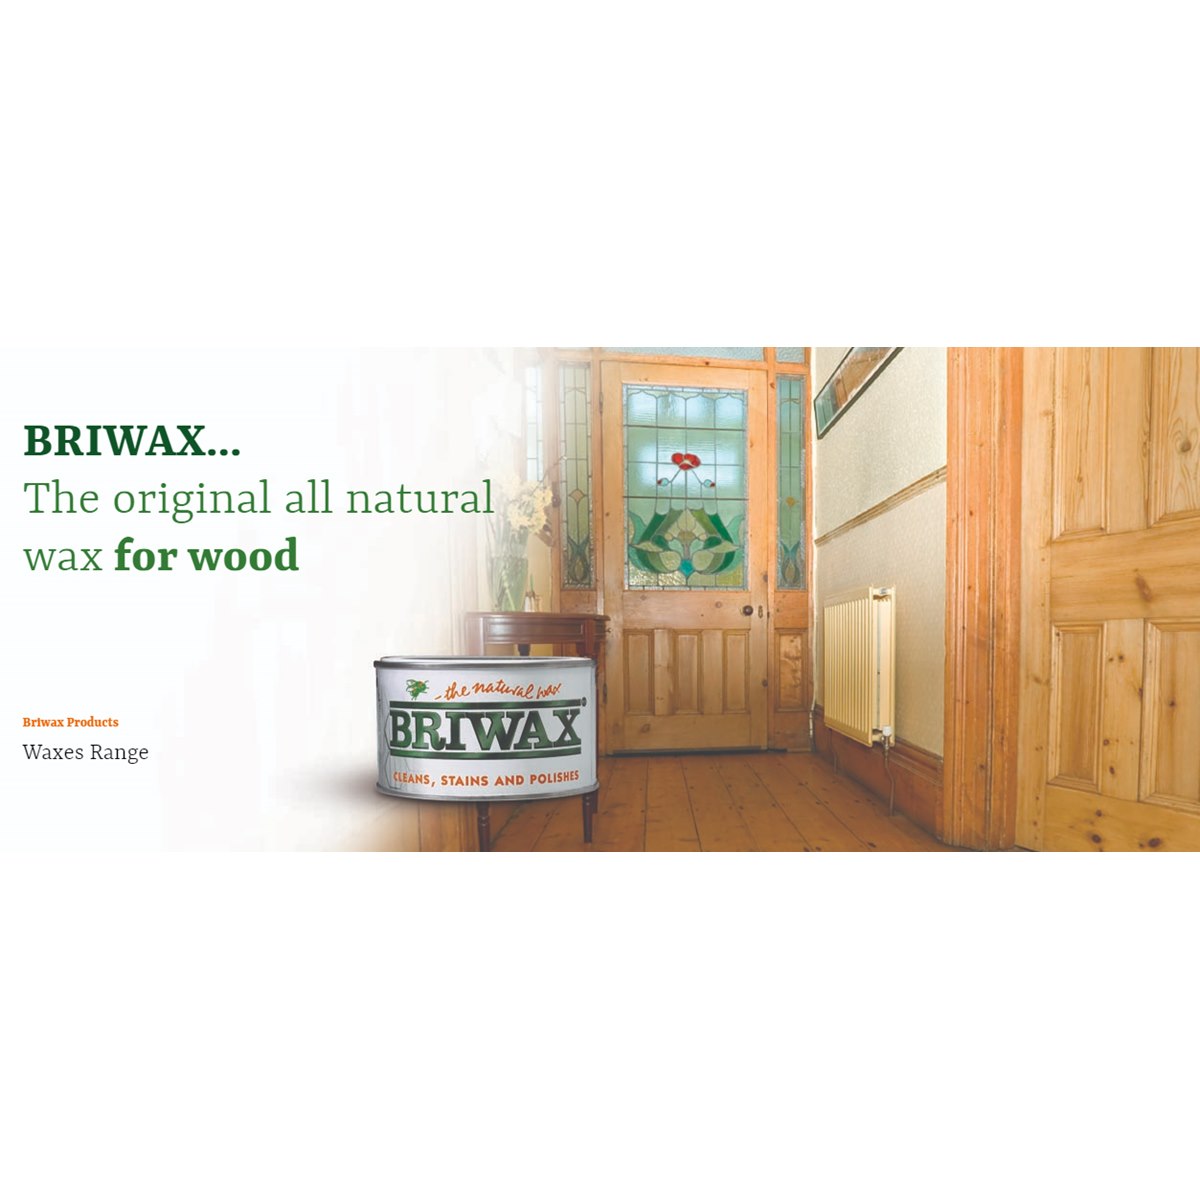 Briwax Products